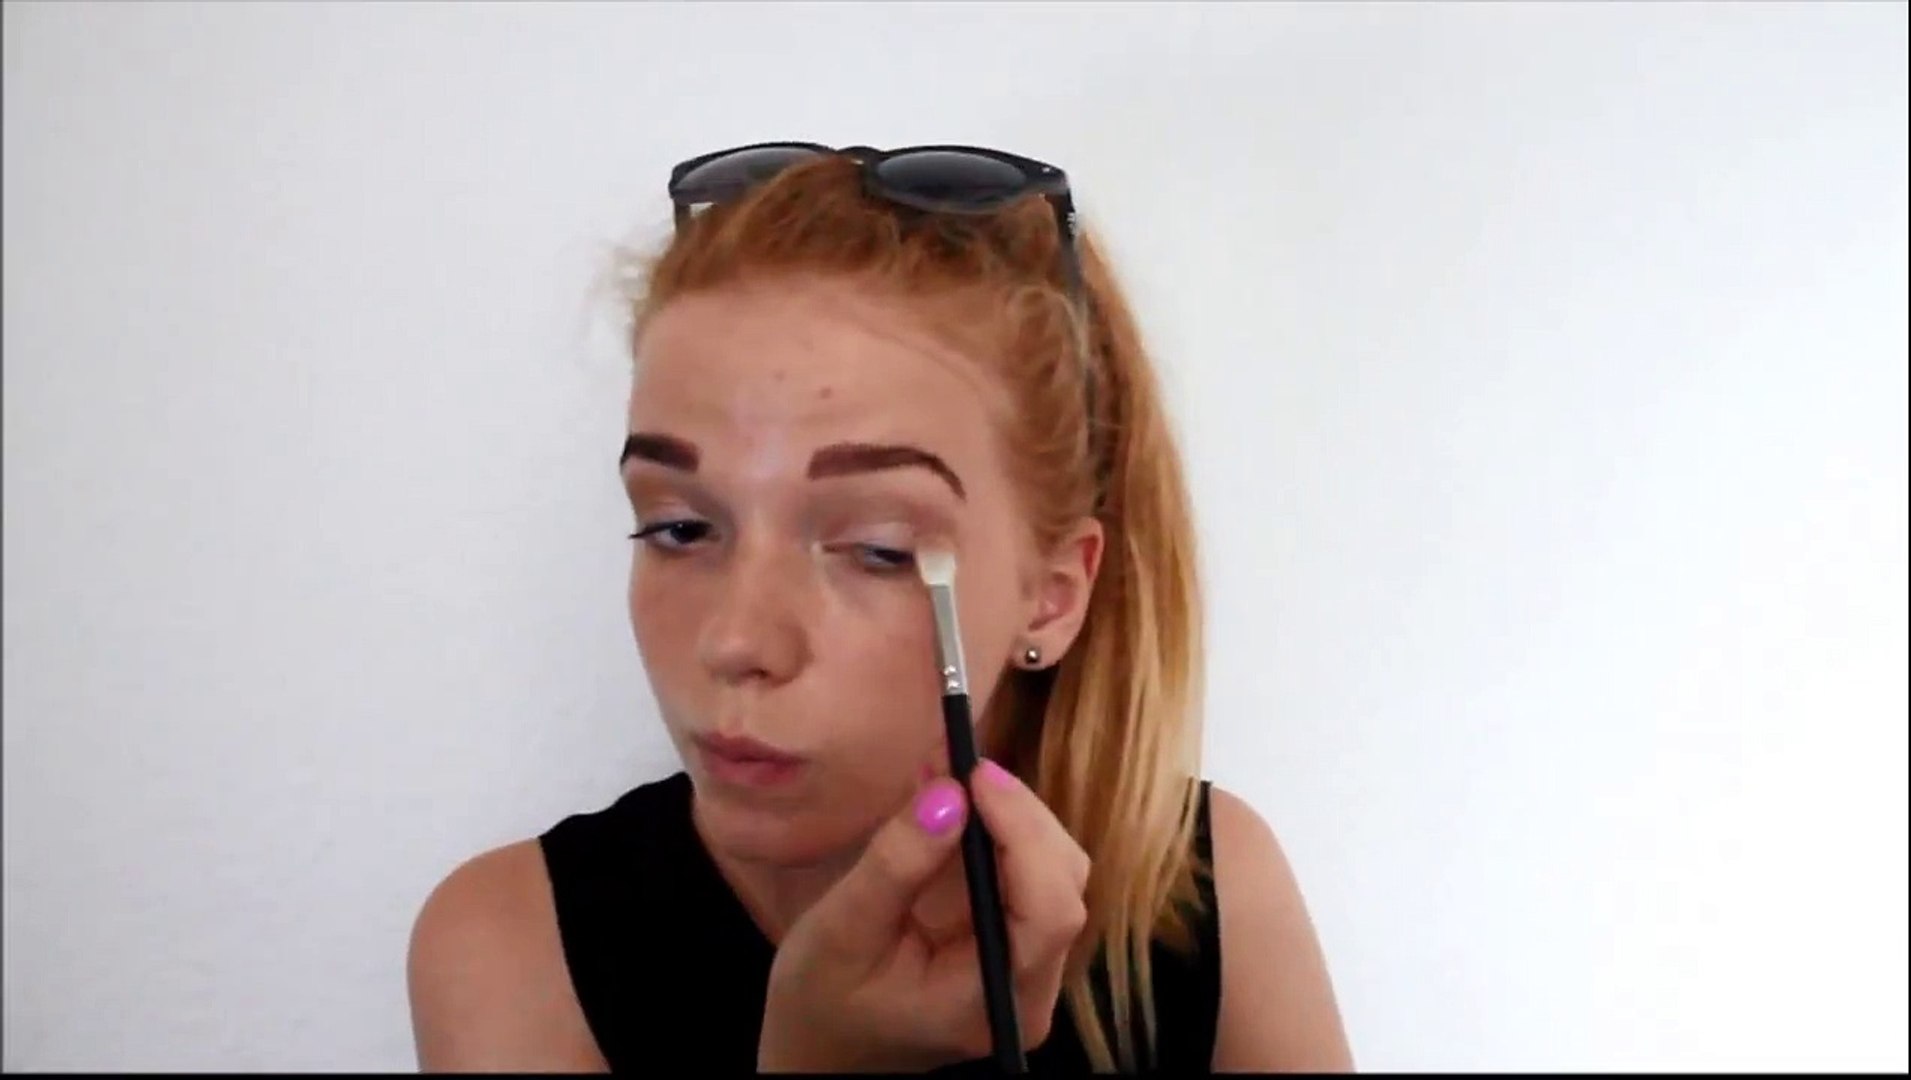 Miley Cyrus Makeup Look - The New Miley